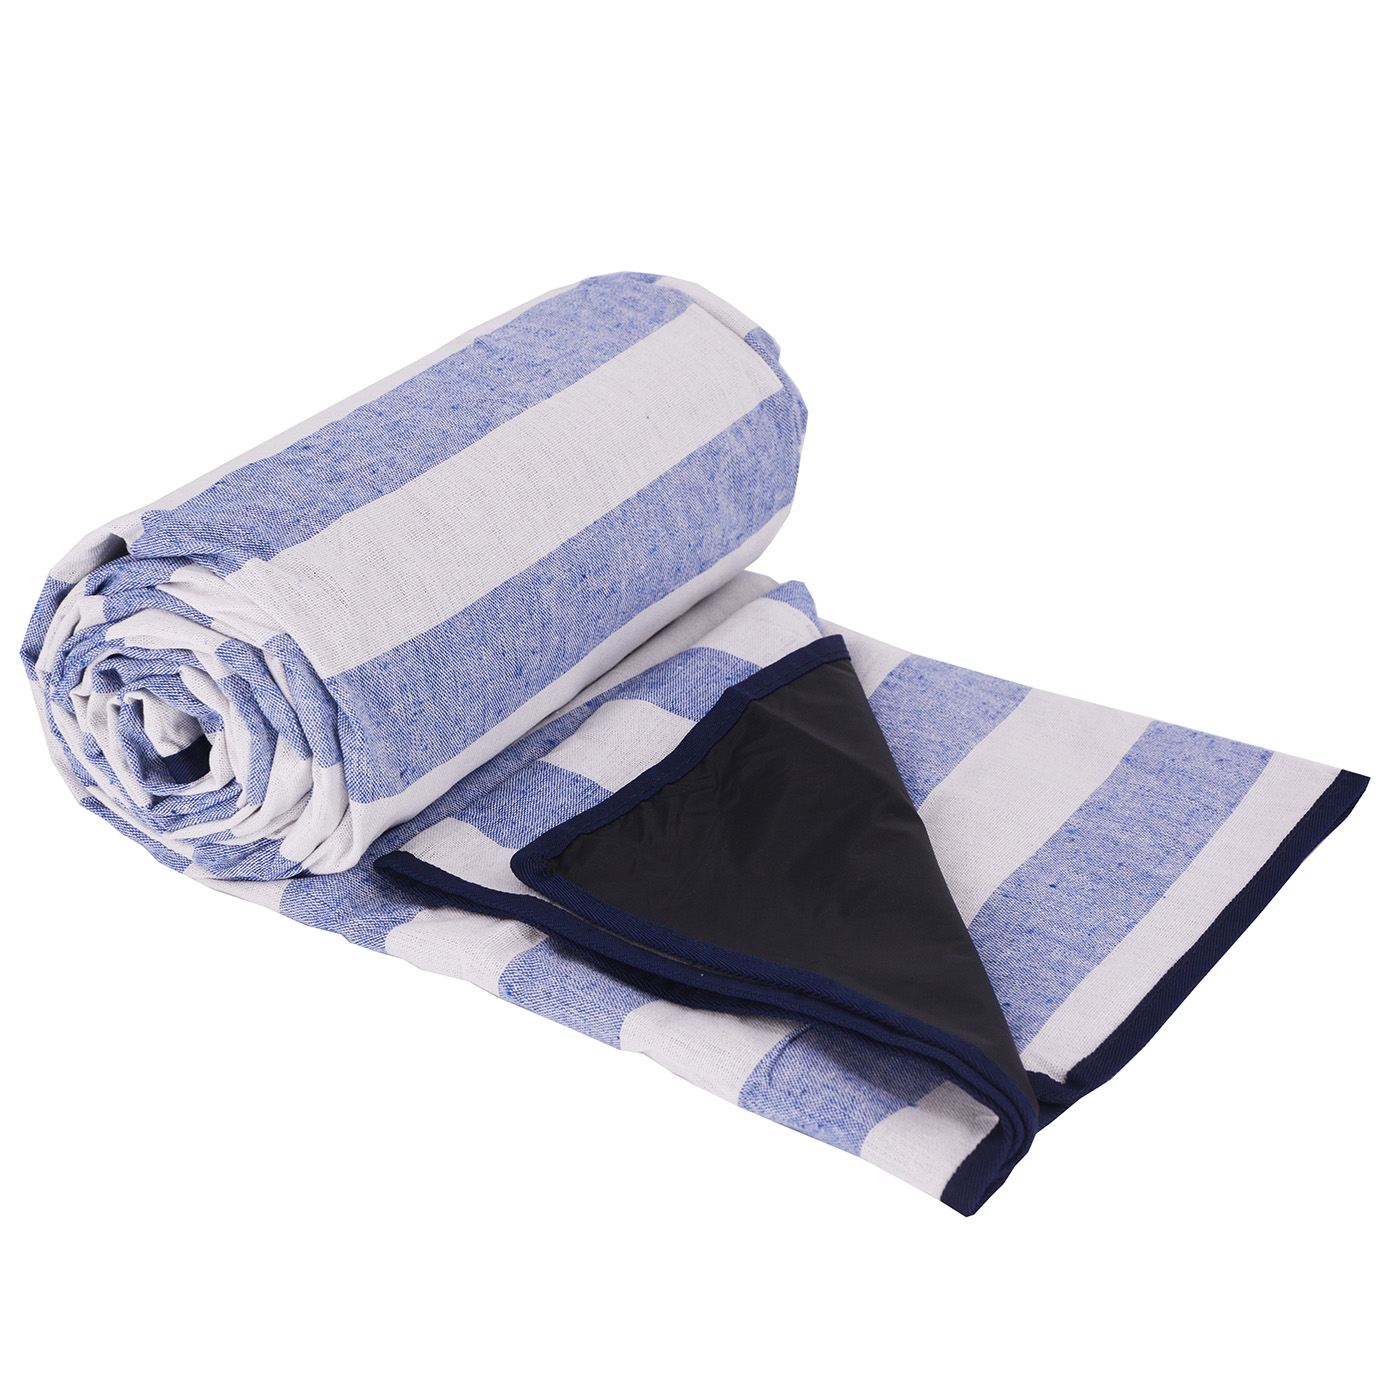 Waterproof picnic blanket sky blue and white